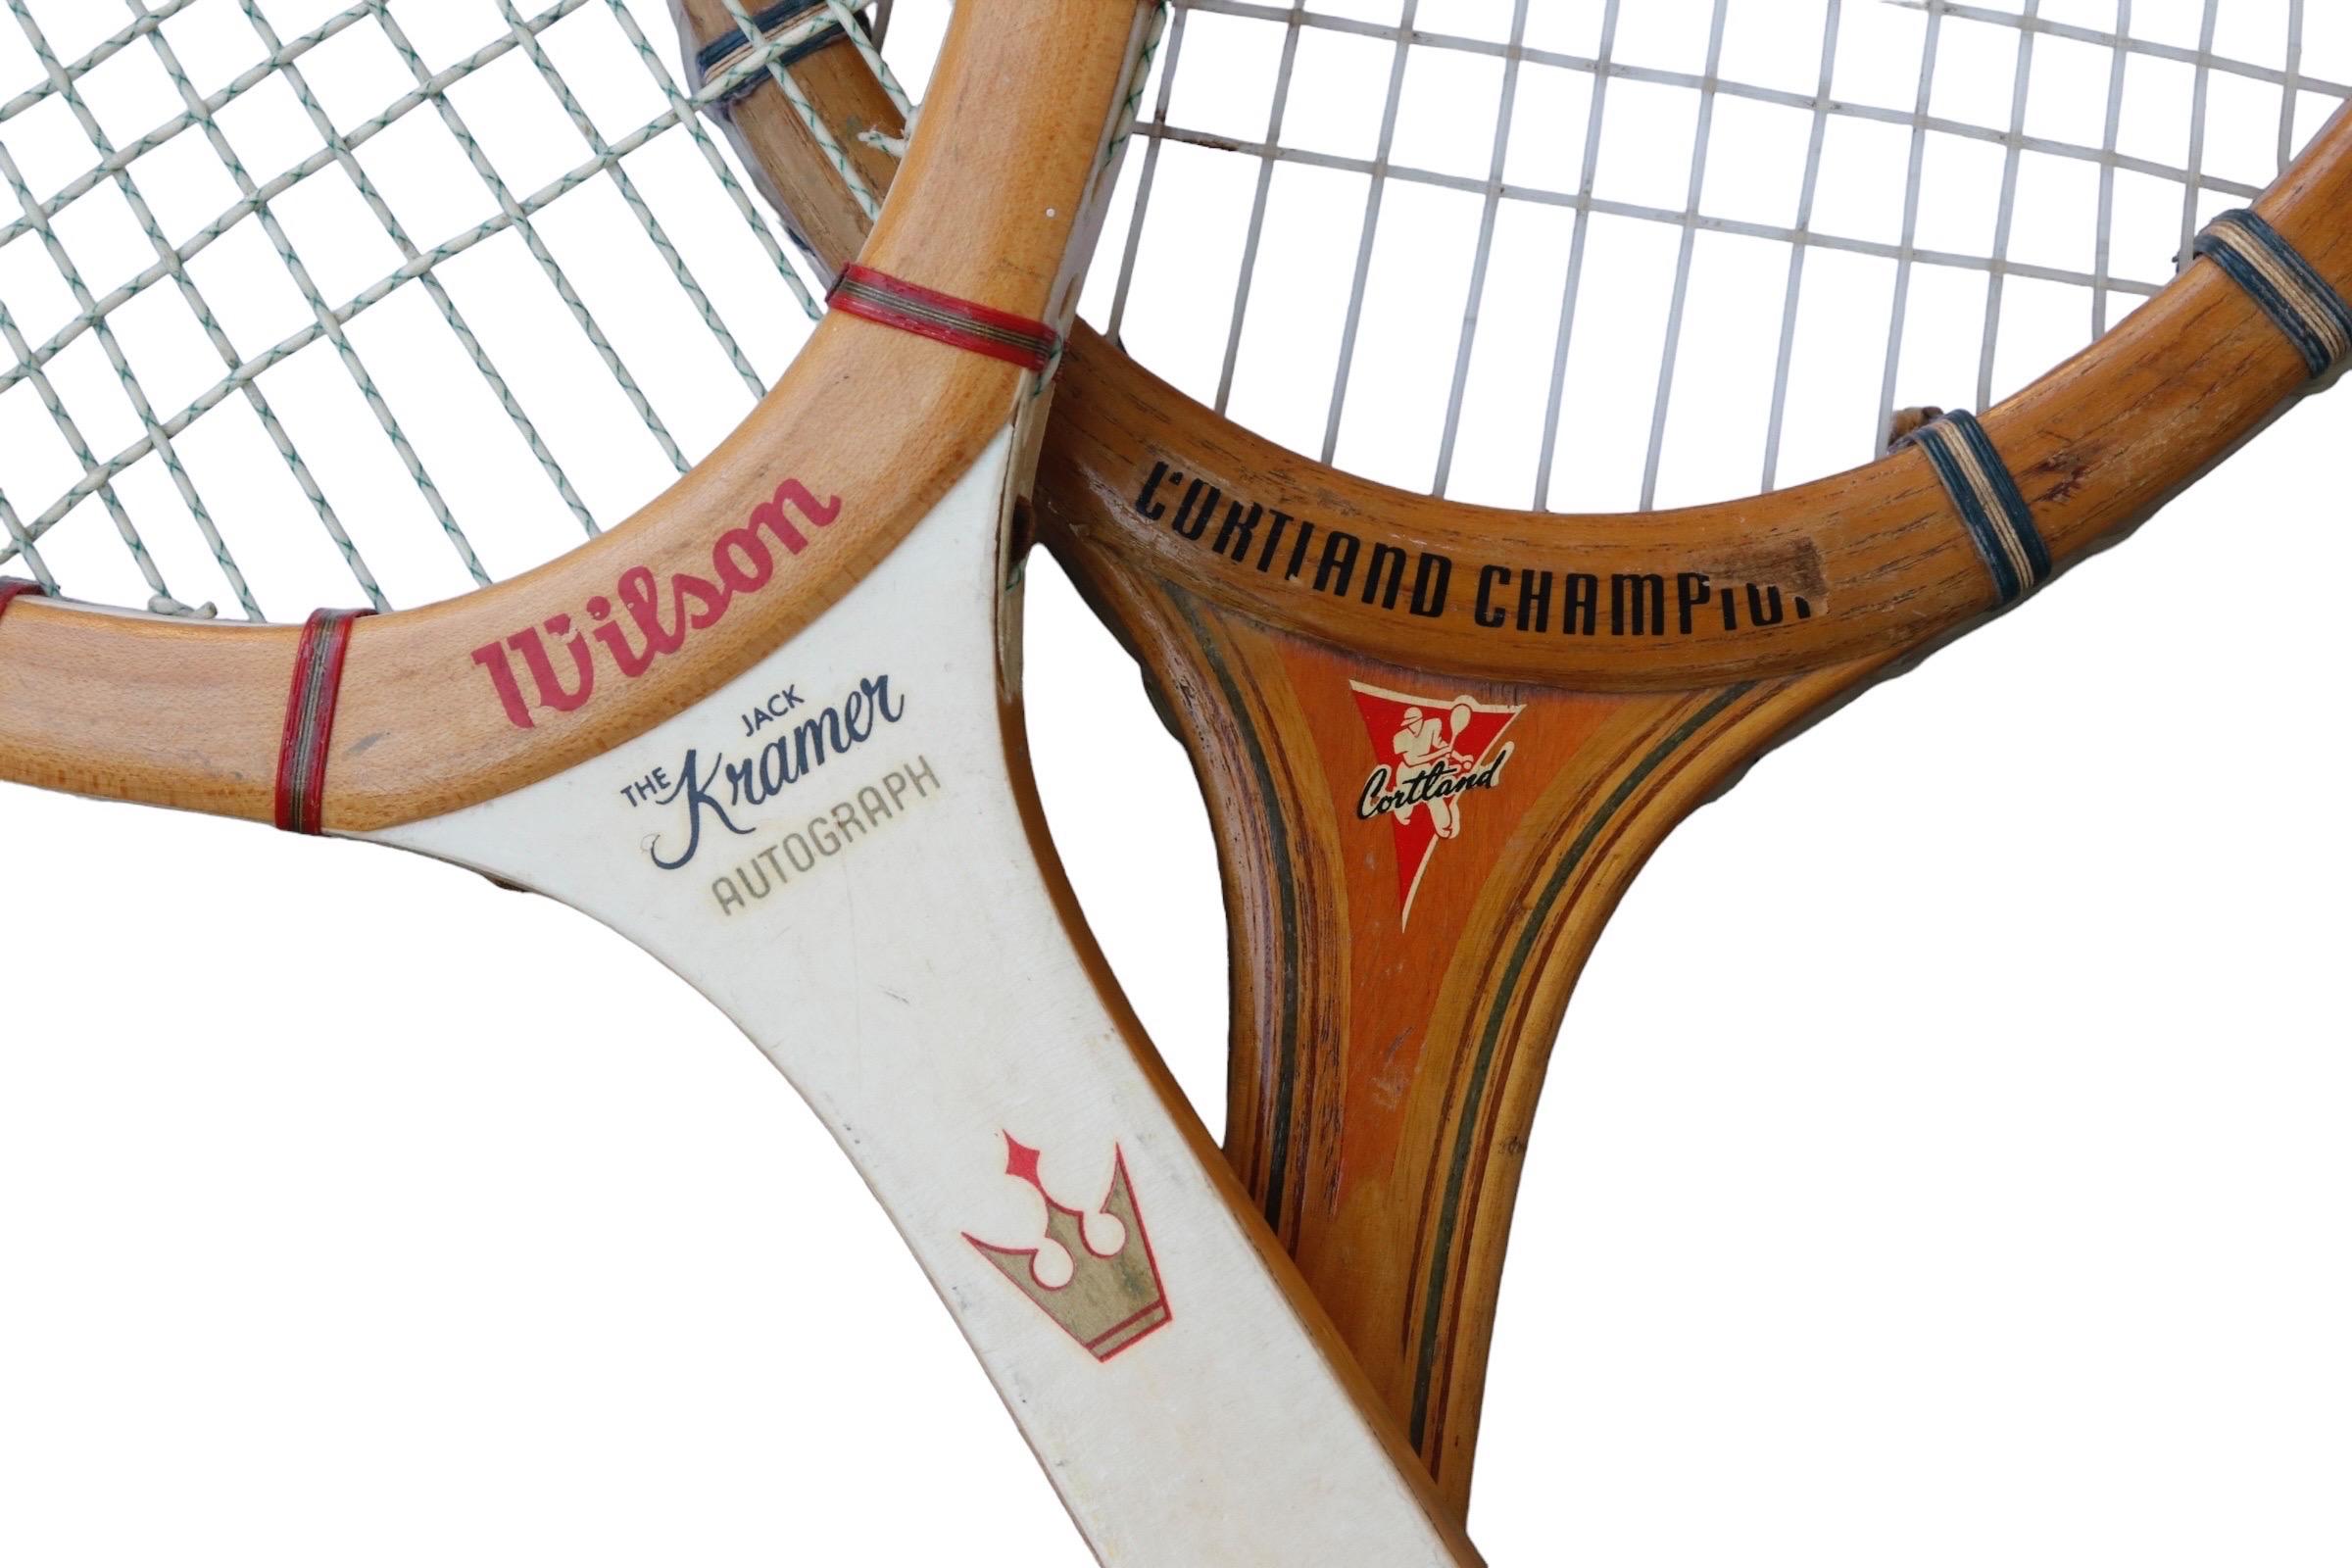 Two vintage tennis rackets dating from the mid 1960’s. A Wilson ‘Jack Kramer Autograph’ racket has a white neck decorated with a three-prong gold crown lined in red. A Cortland Champion racket has the Cortland logo on the neck. Both handles are